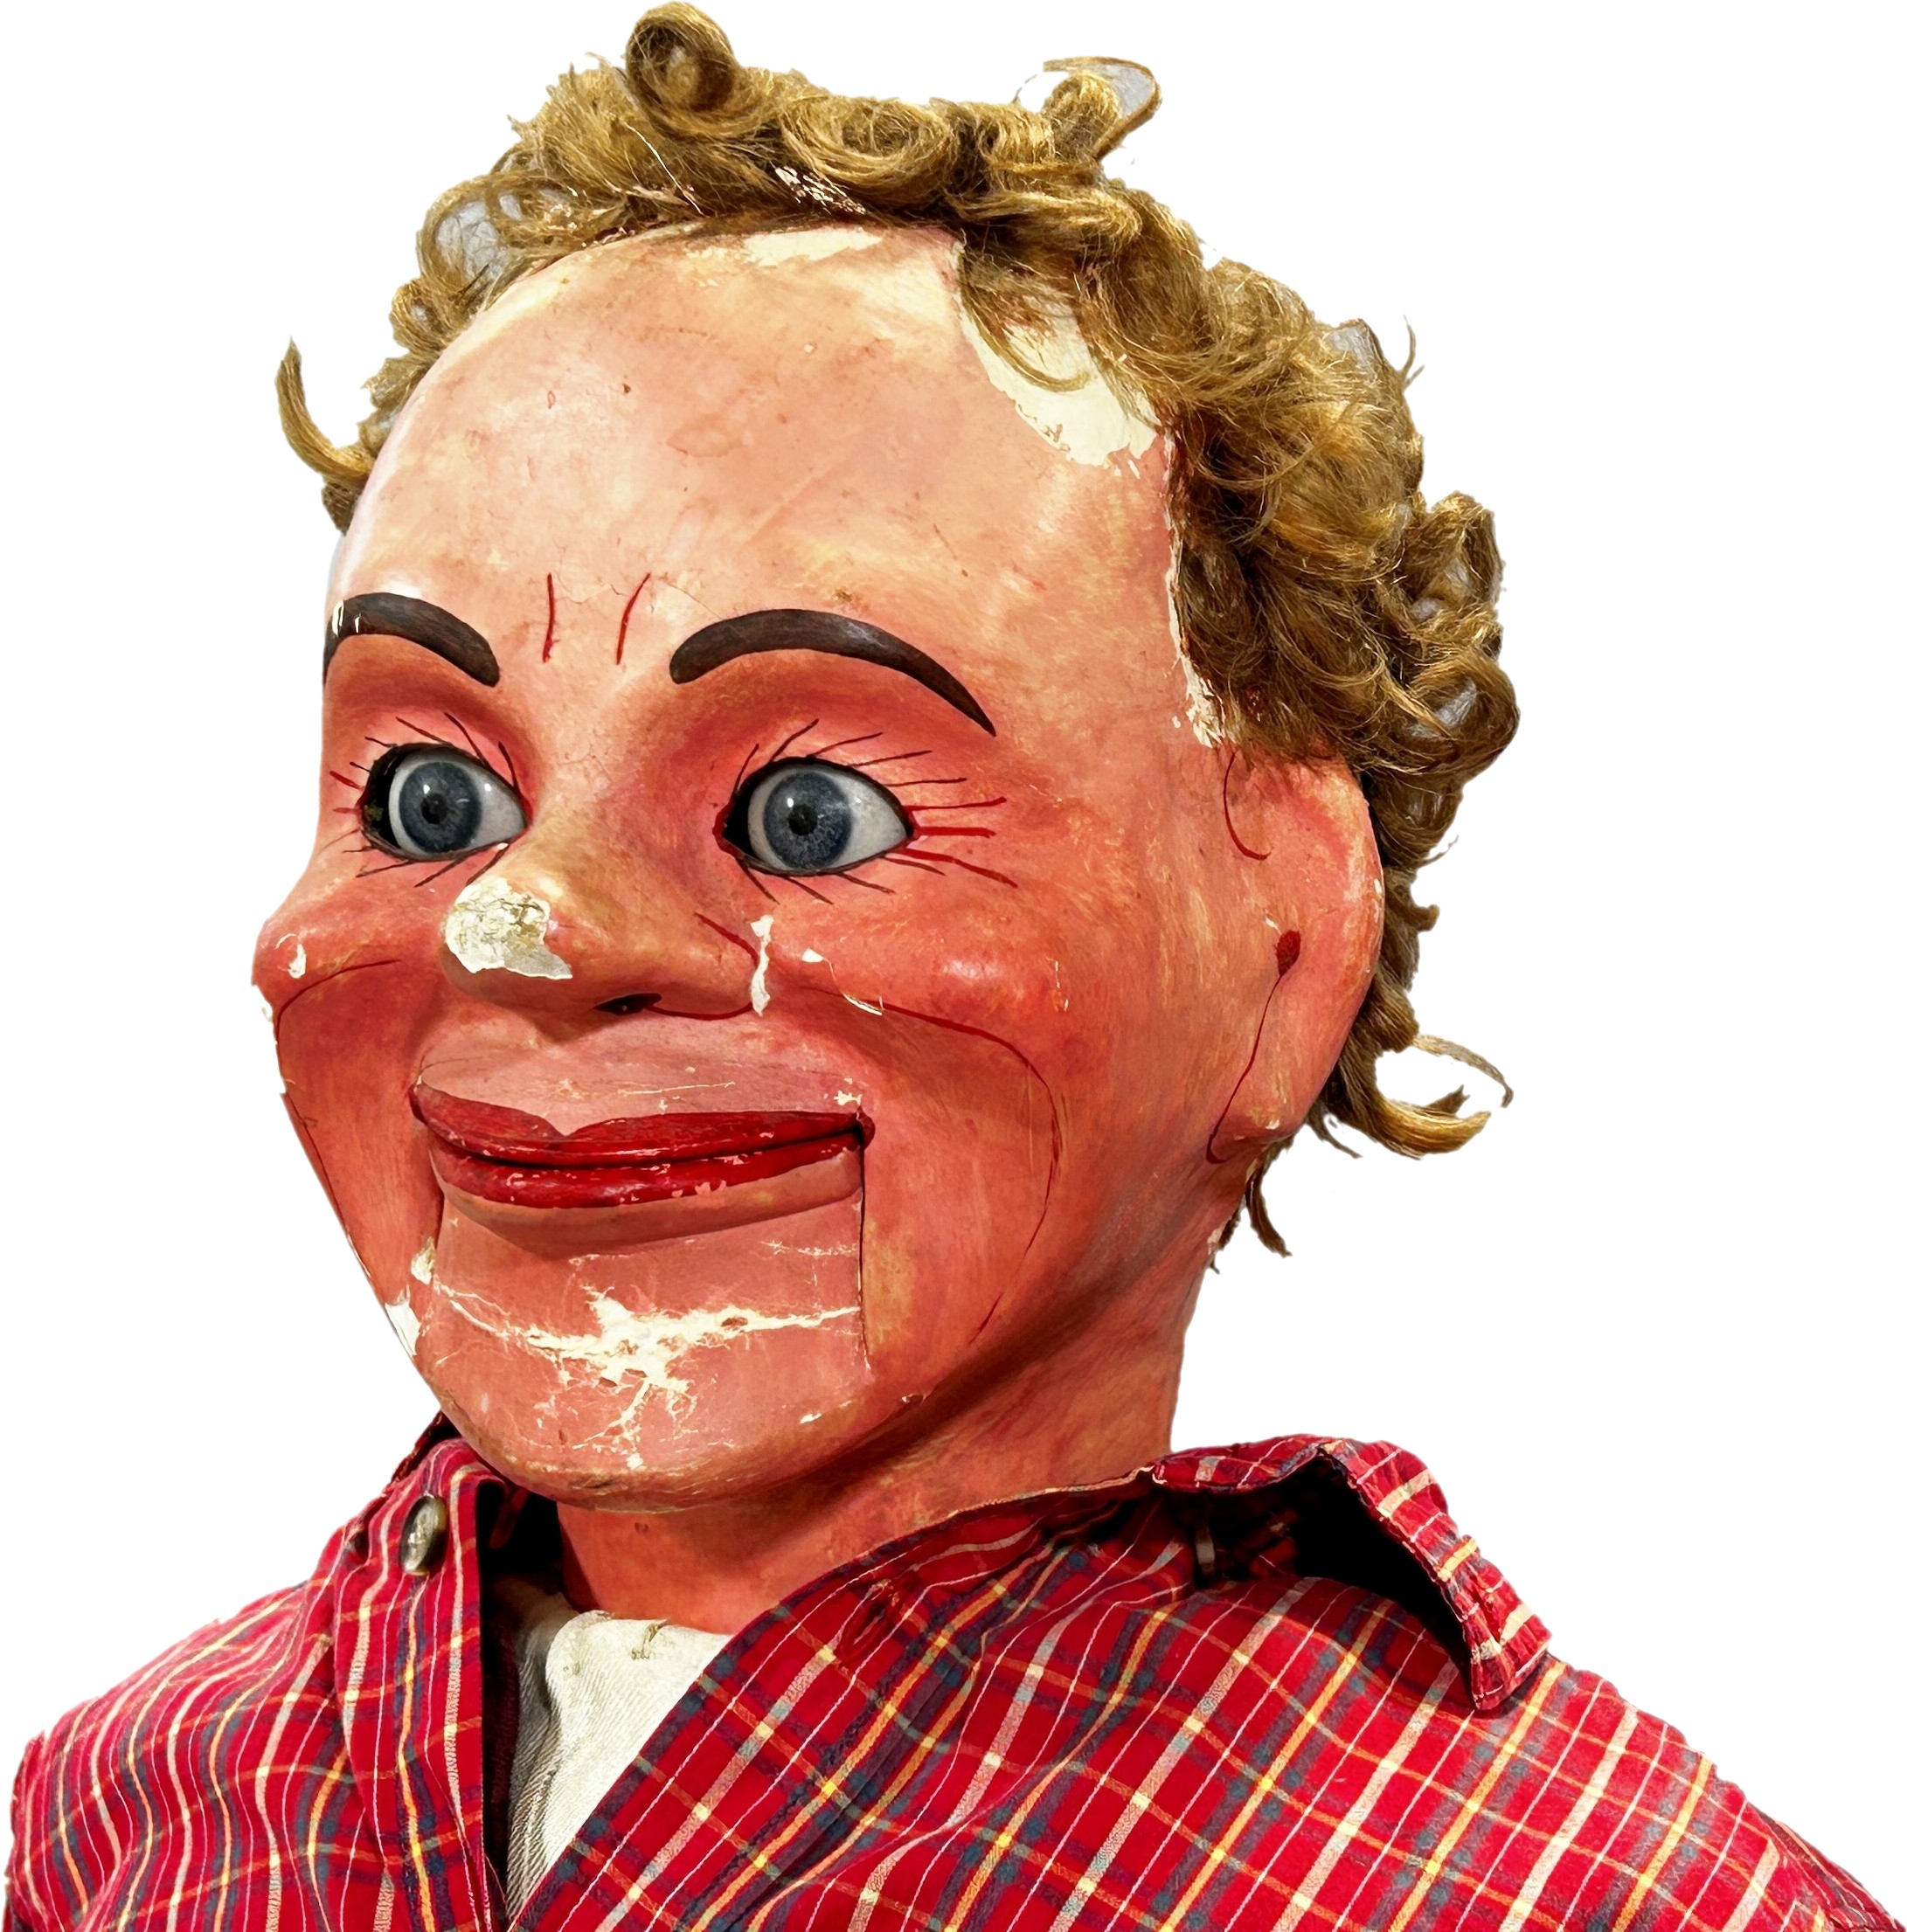 A Ventriloquist Dummy, with working mouth and eyes, 90cm tall approximately. - Image 3 of 4